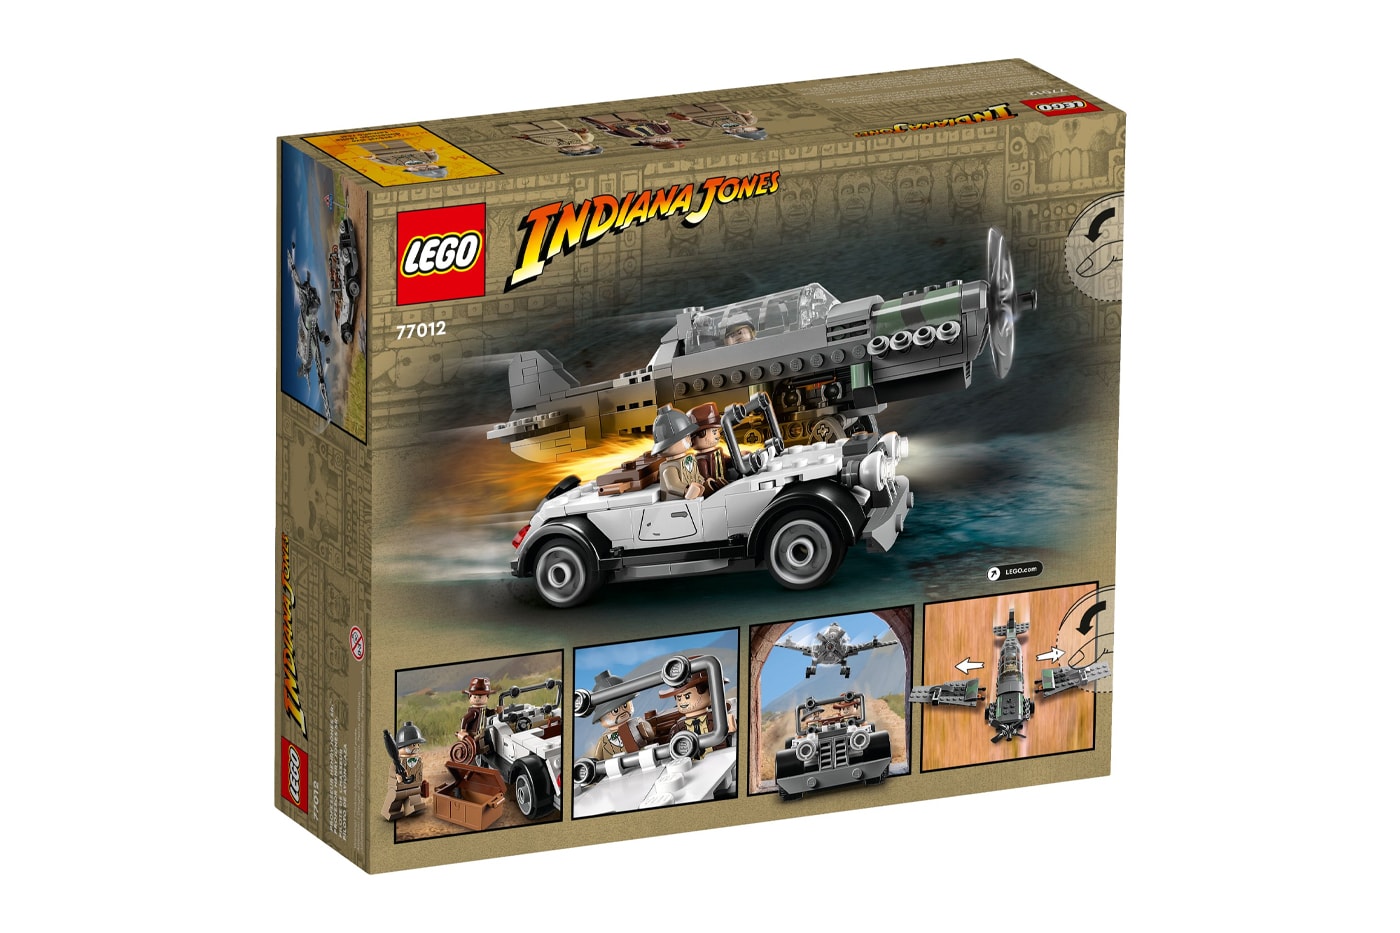  LEGO Indiana Jones Temple of The Golden Idol 77015 Building  Project for Adults, Iconic Raiders of The Lost Ark Movie Scene, Includes 4  Minifigures: Indiana Jones, Satipo, Belloq and a Hovitos